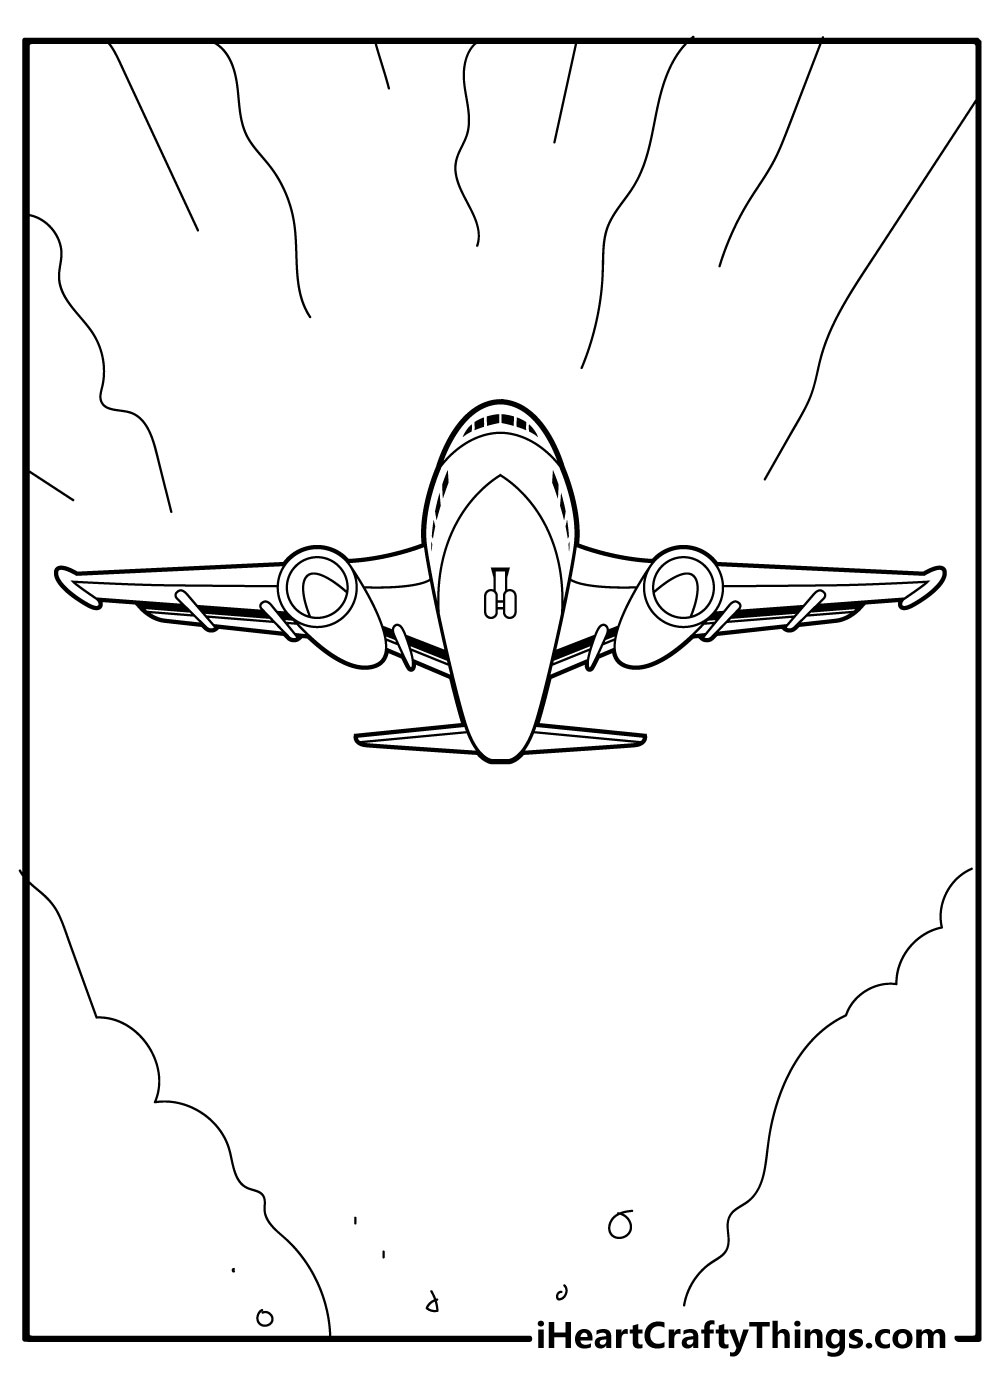 Airplane coloring pages free printables